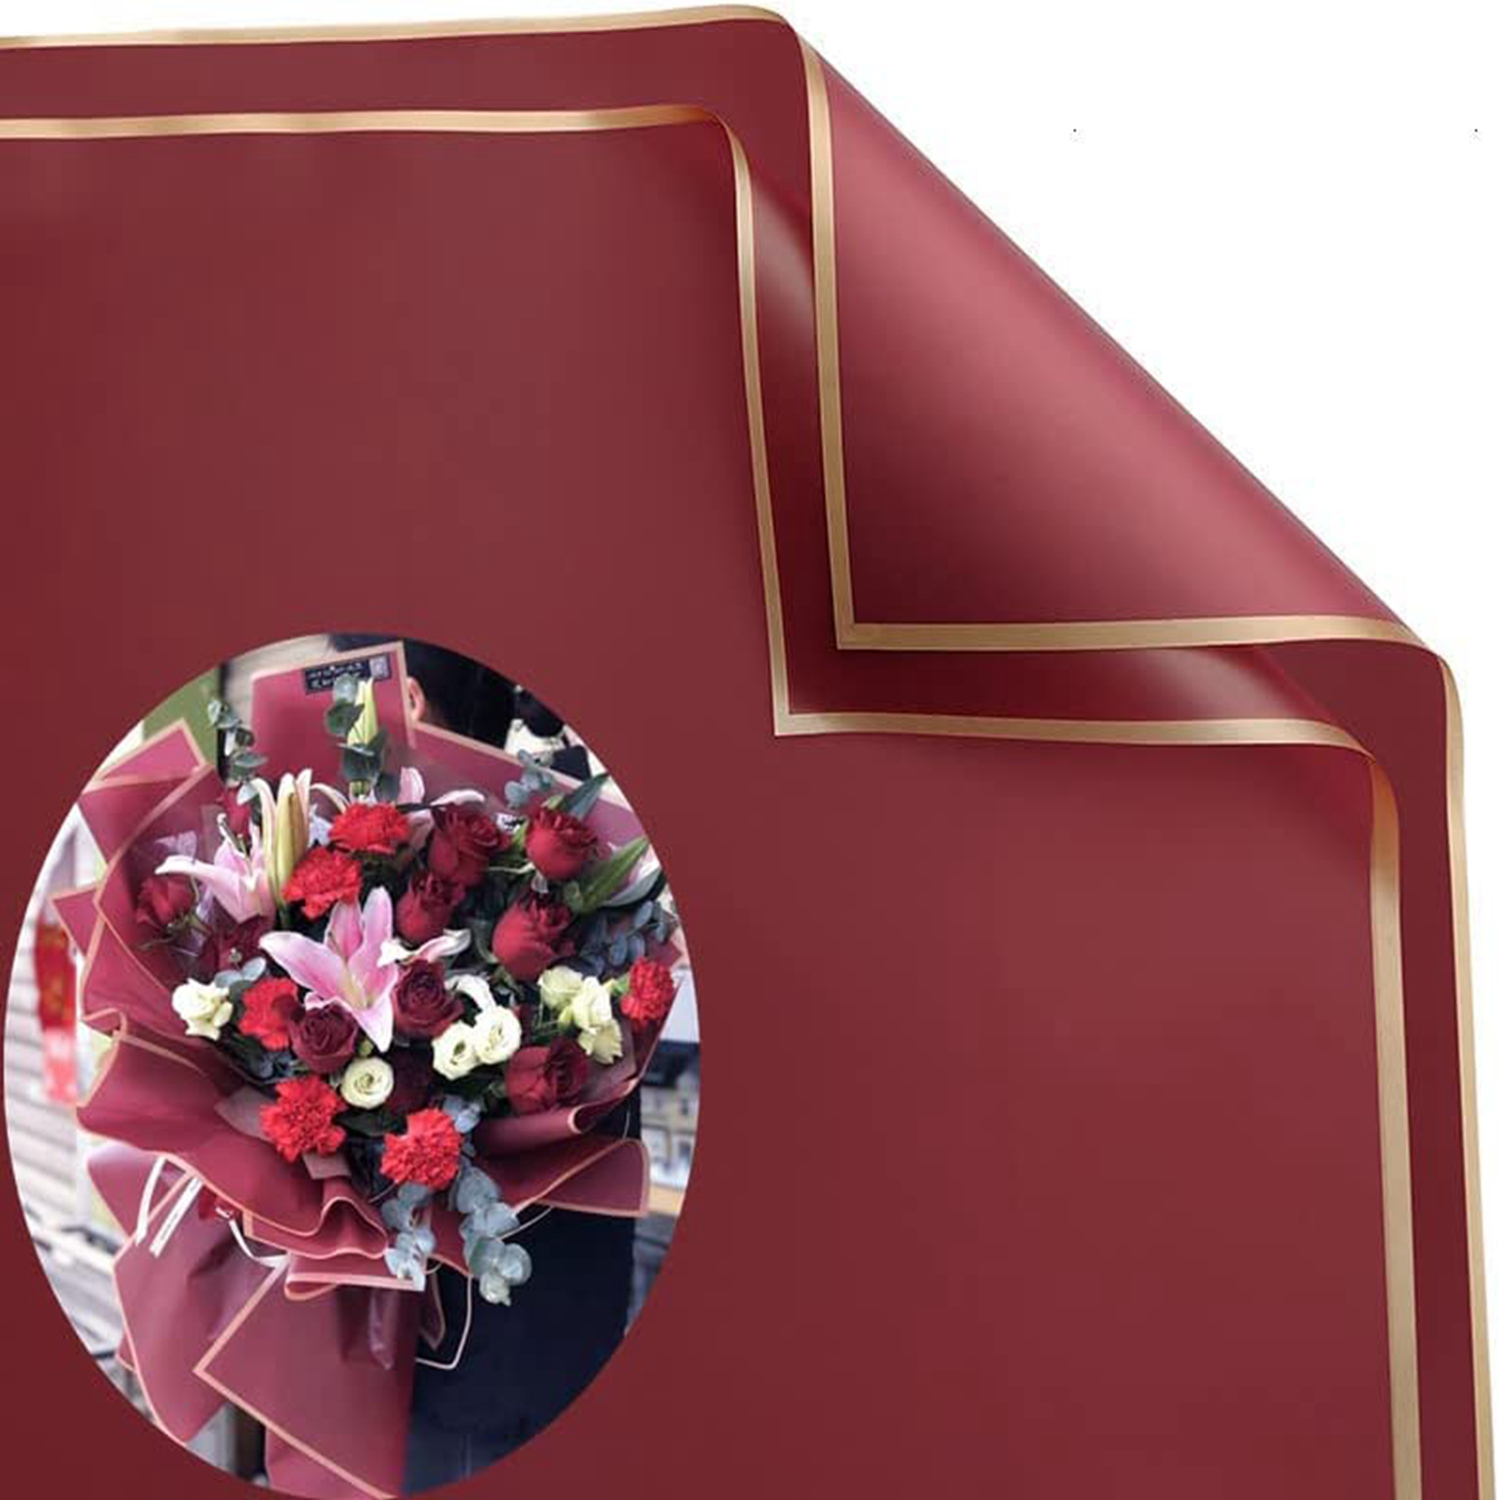 Wiaregom 20 Sheets Flower Wrapping Paper Gold Edge Florist Bouquet Supplies Waterproof Flowers Packaging Paper with Ribbon, 22.8x22.8 inch(Burgundy)